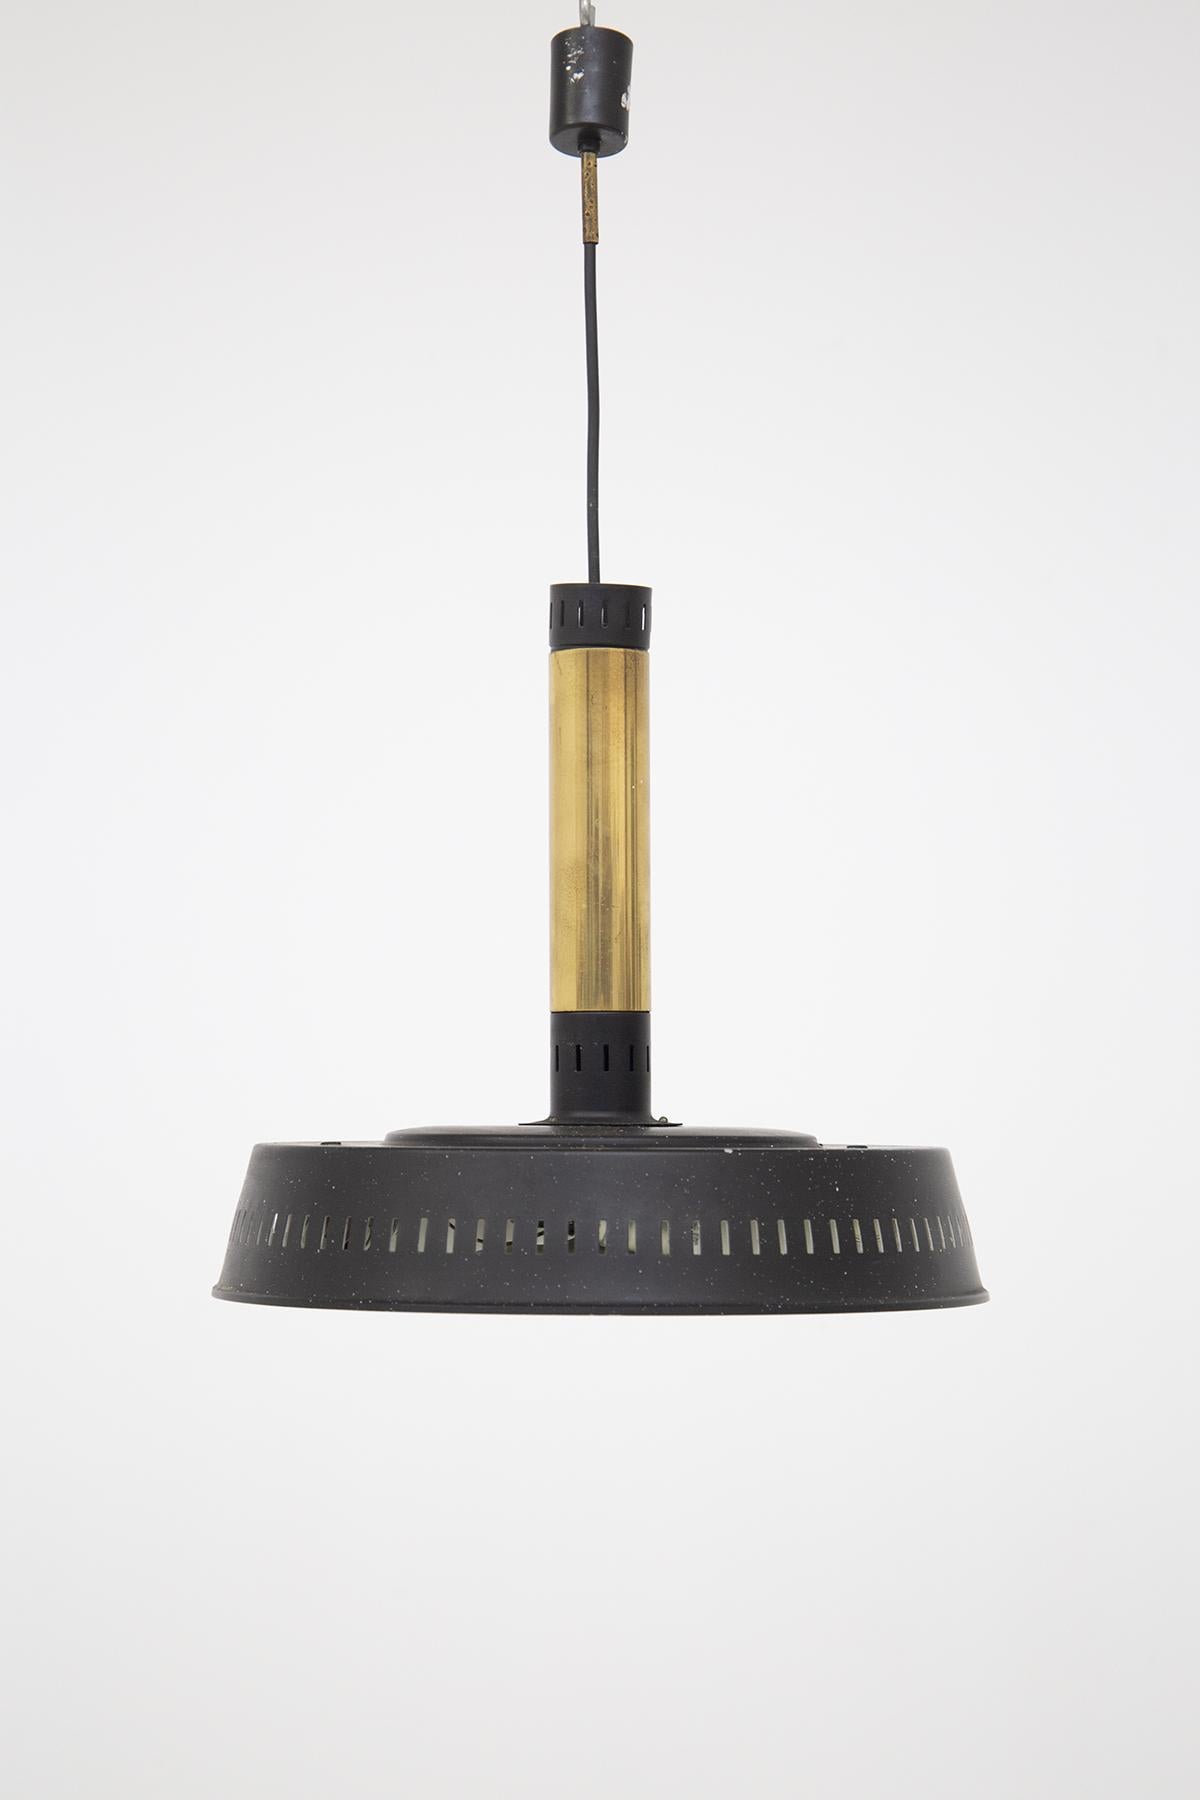 Modernist Italian manufacture pendant from the 1950s. The pendant is made of tubular brass. The ceiling light or lamp holder hat is made of black painted aluminum of circular shape. Below the ceiling light is frosted opal glass with a light ornament